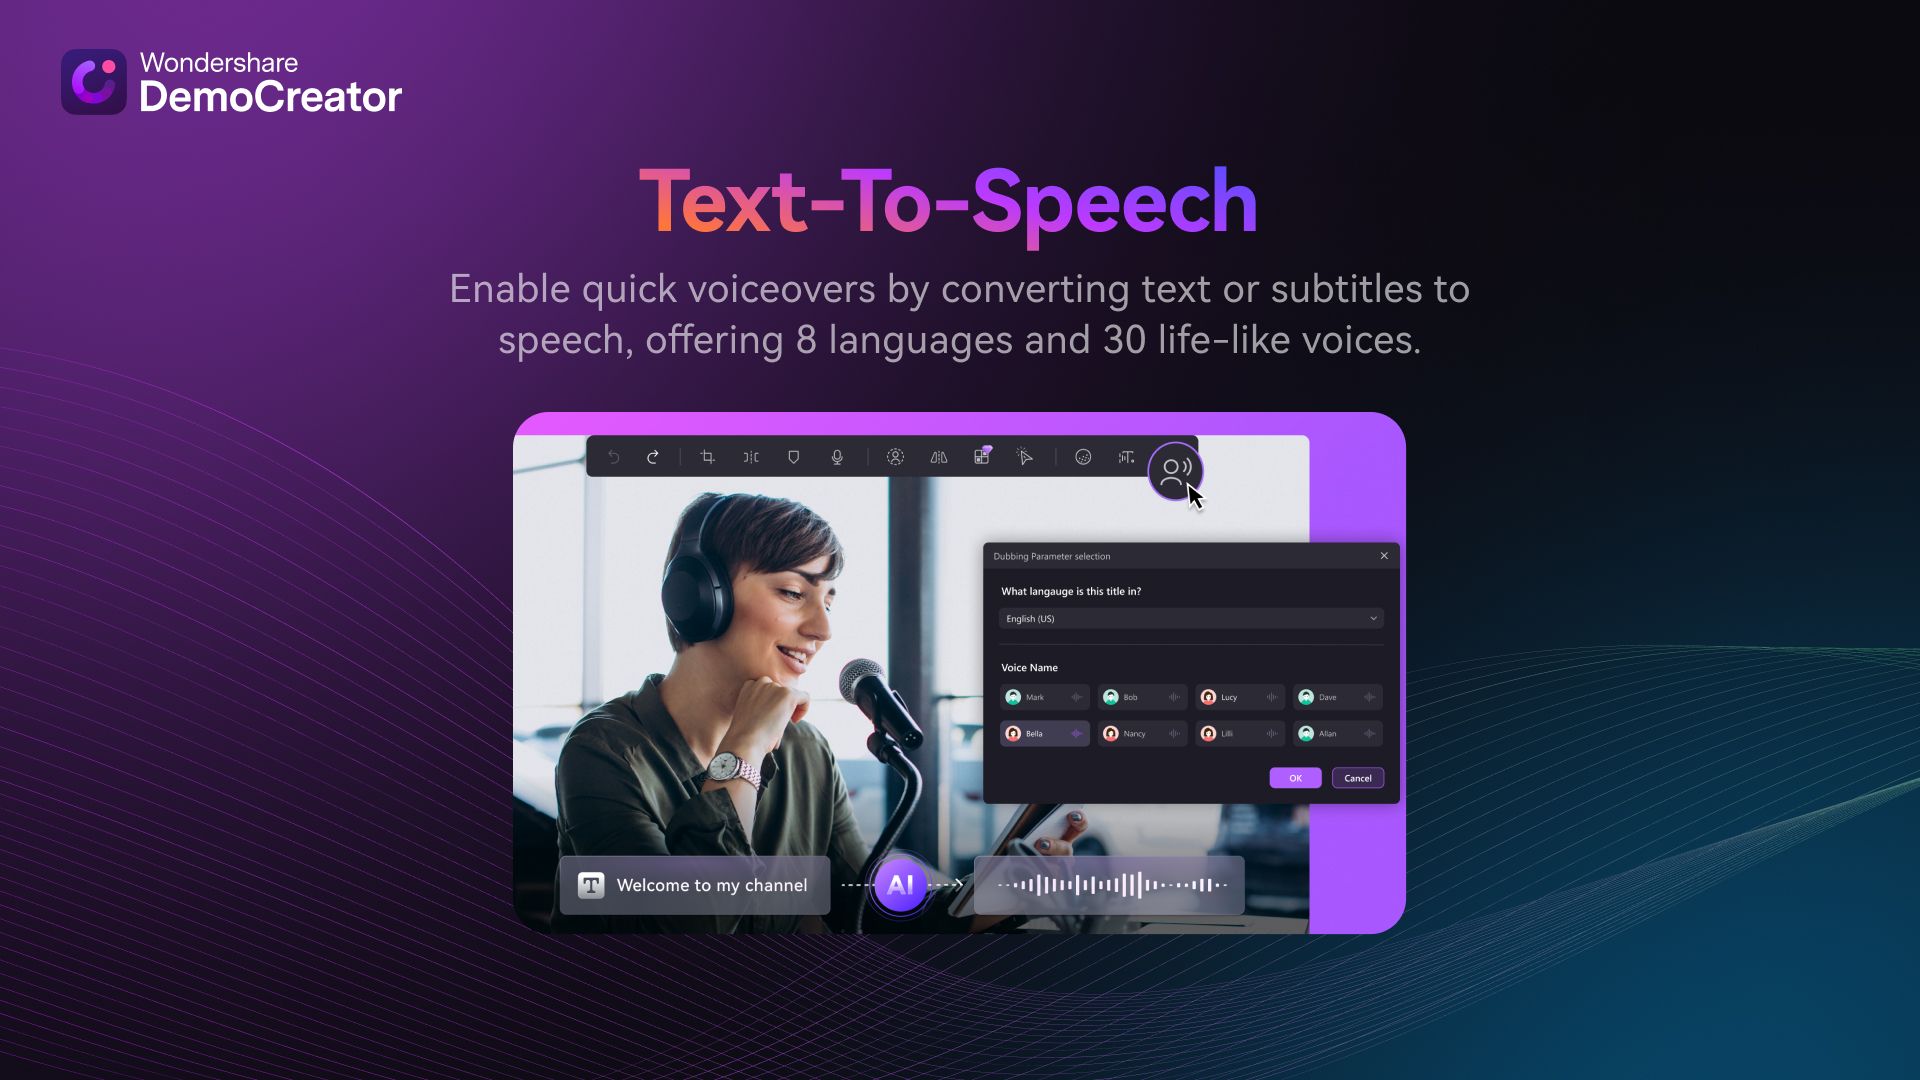 Woman Recording for DemoCreator AI Text-To-Speech Feature Showcase